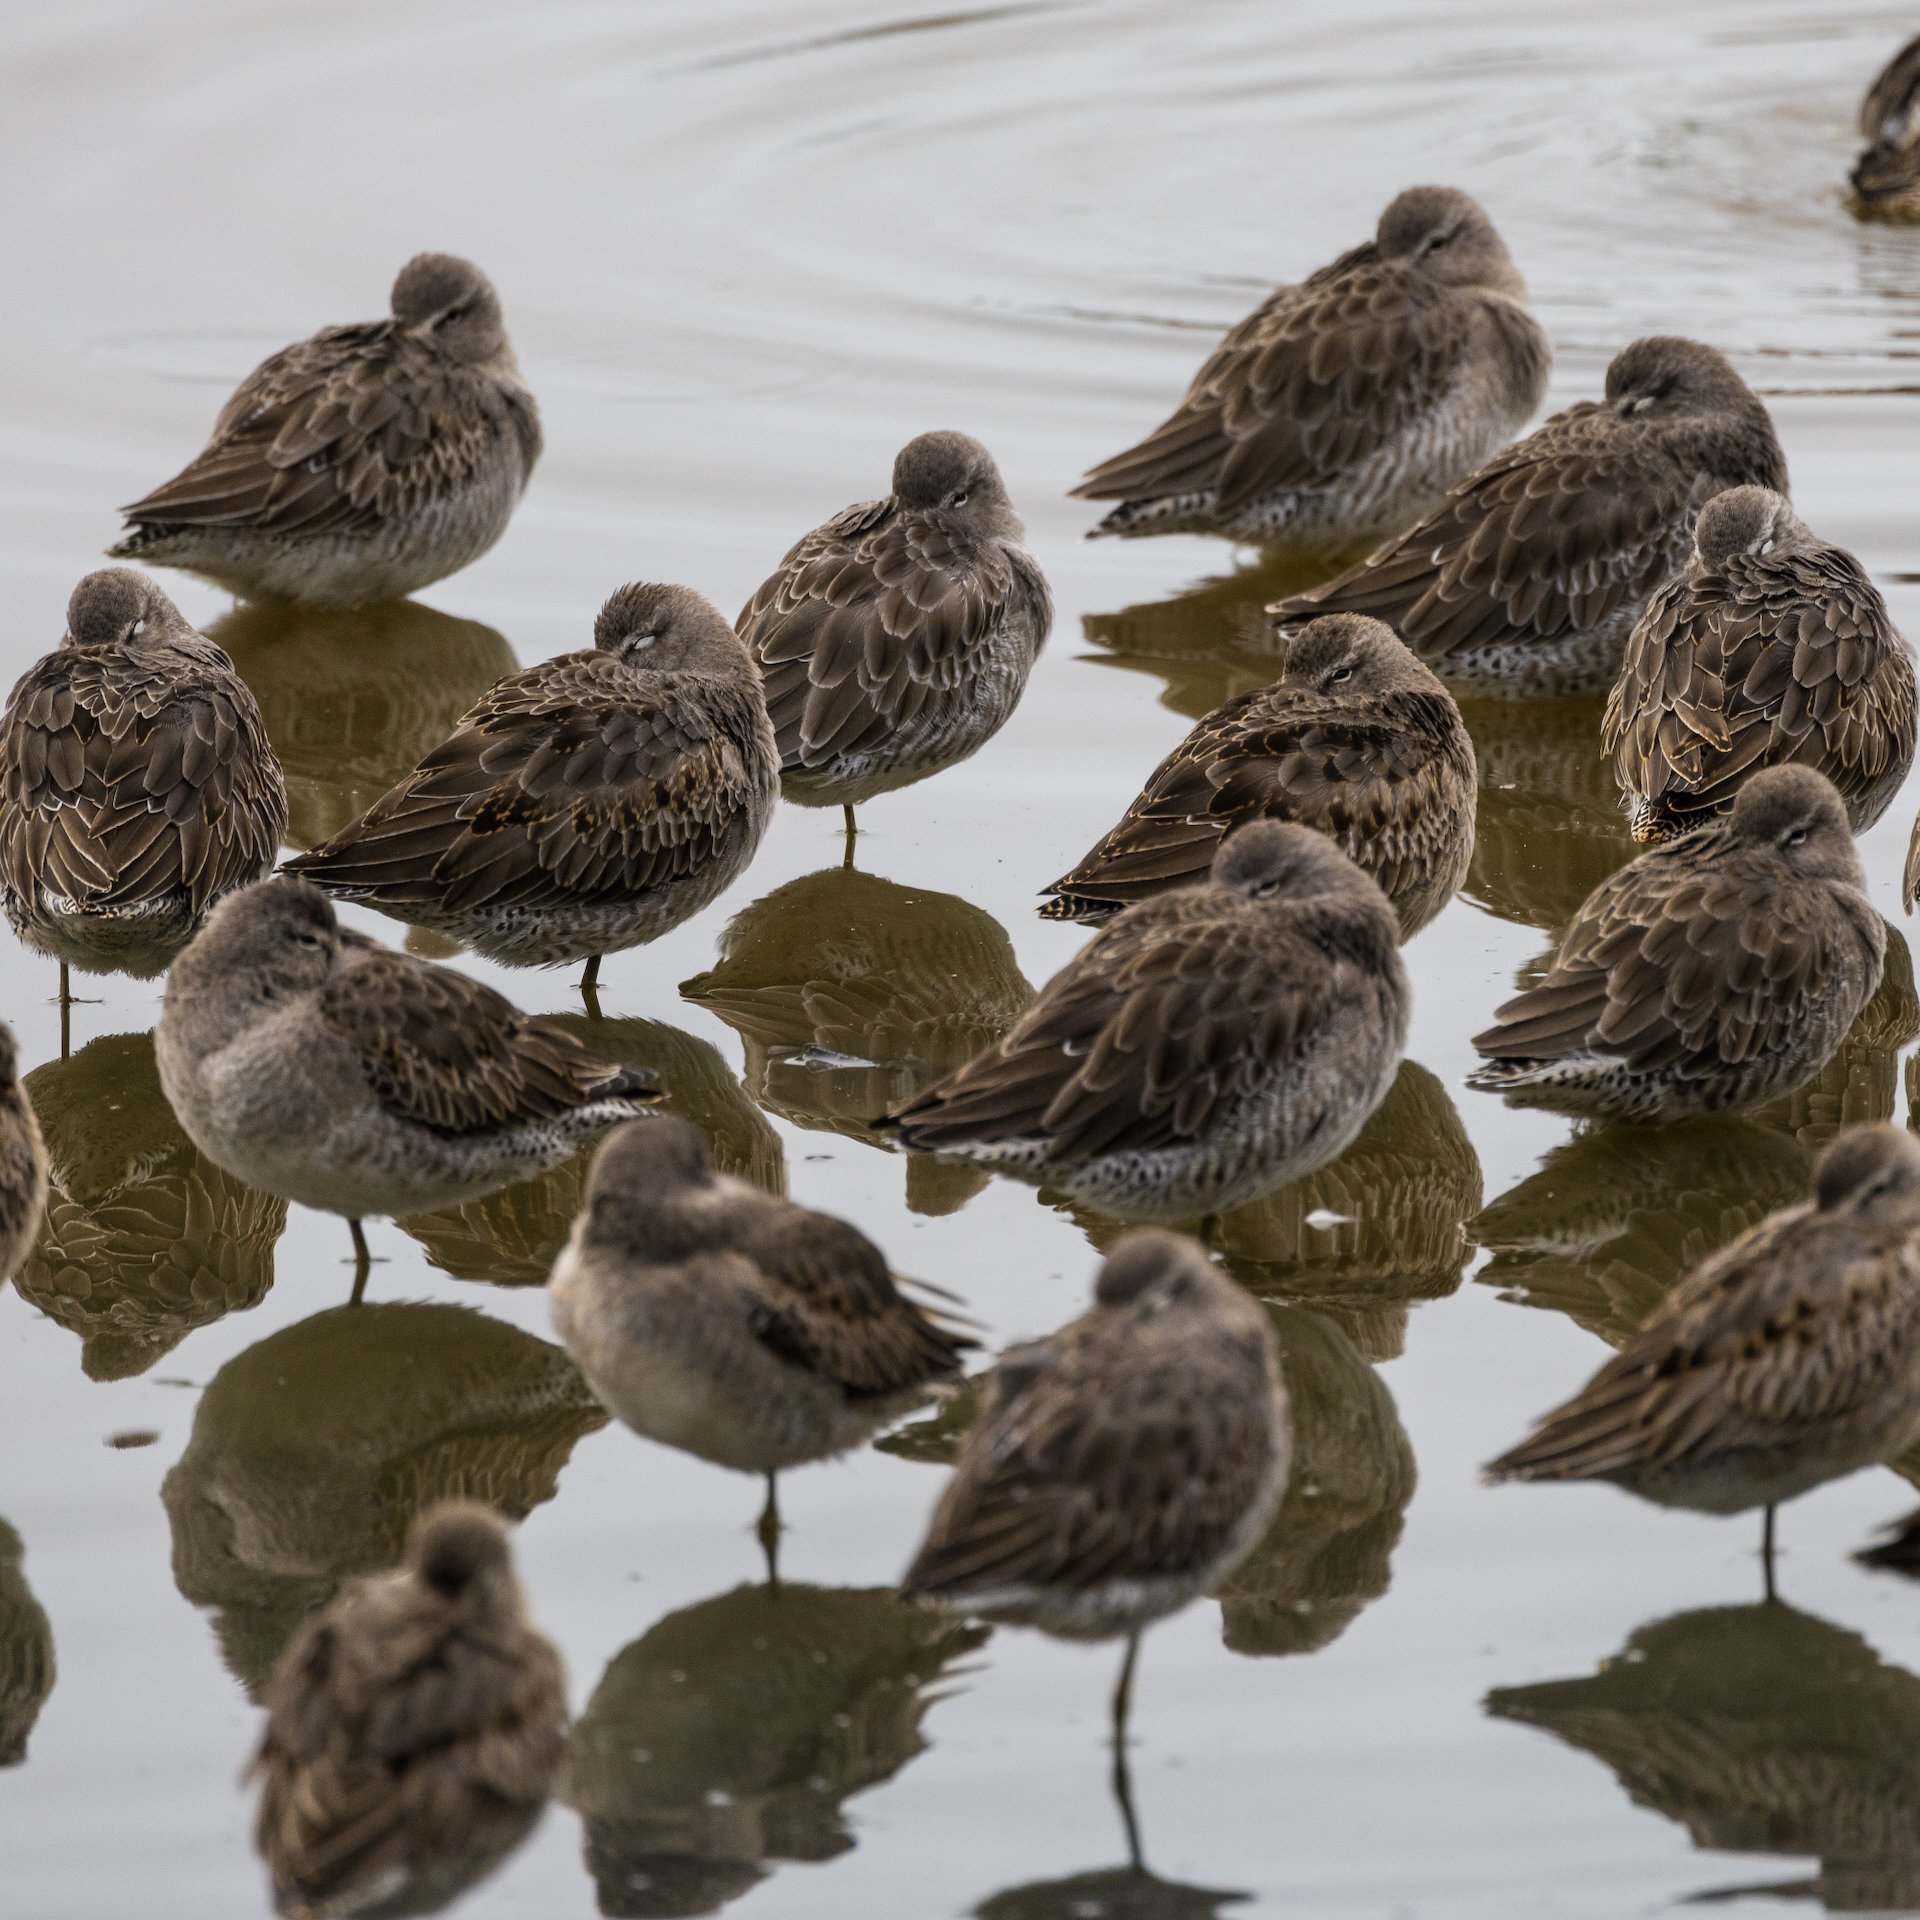  More of the dowitchers (I think).  